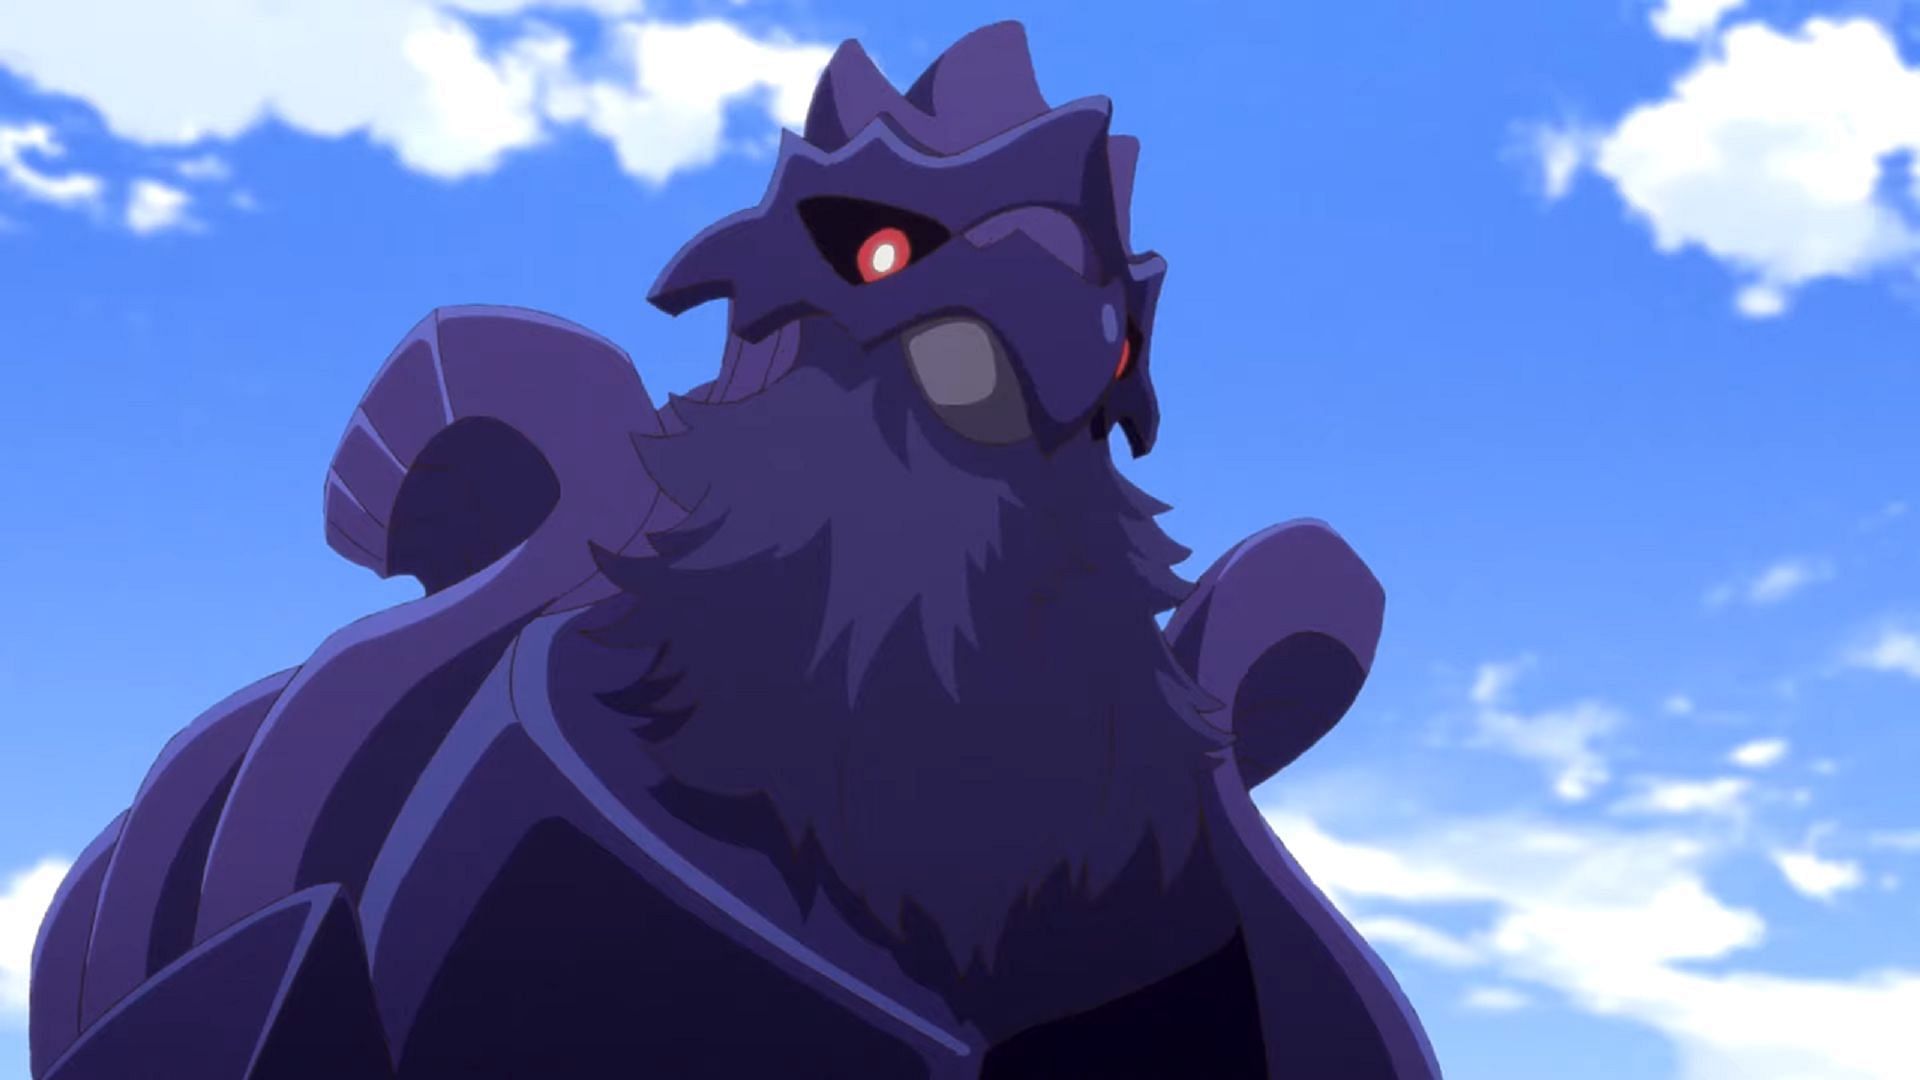 Corviknight has returned in Generation IX after its Pokemon Sword and Shield debut (Image via The Pokemon Company)